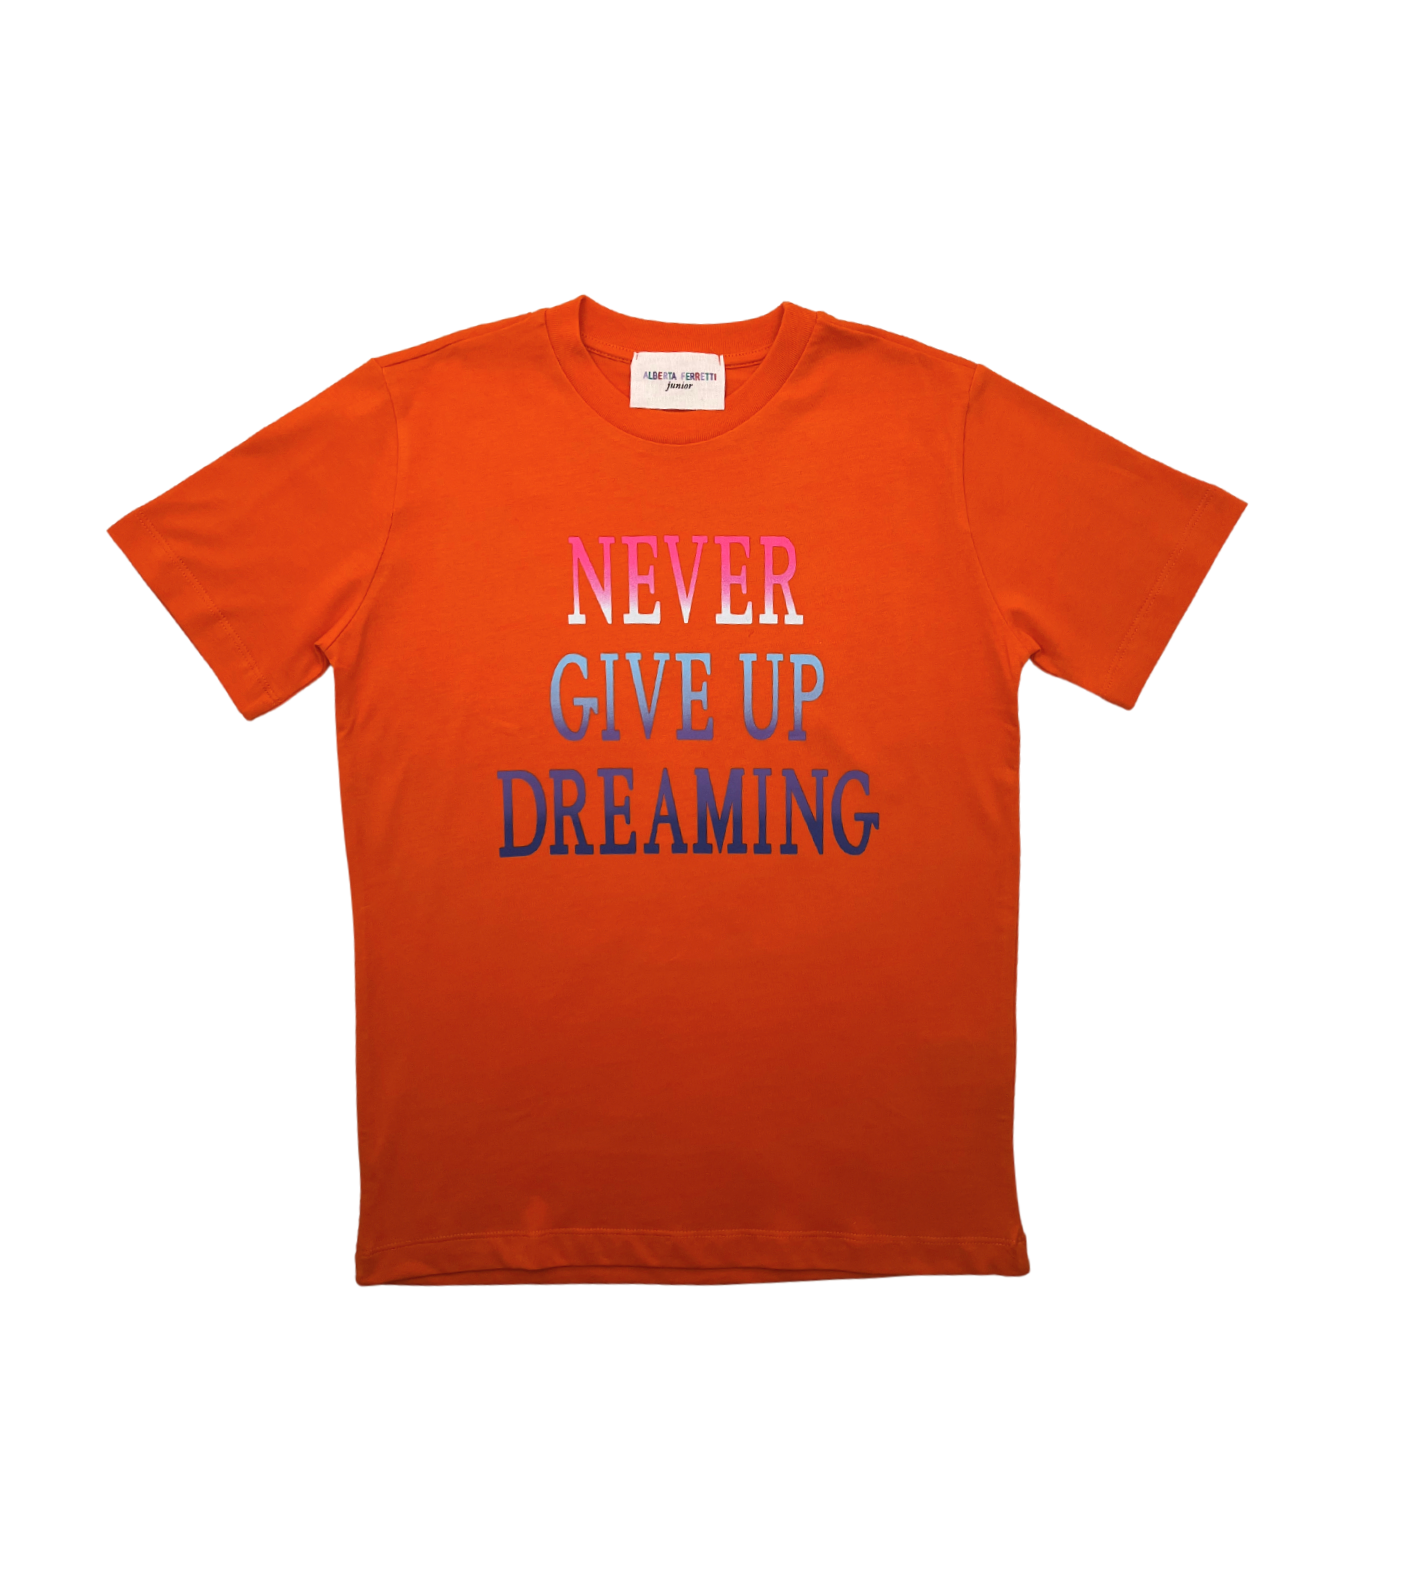 ALBERTA FERRETTI - "Never give up dreaming" T-shirt - 12 years old